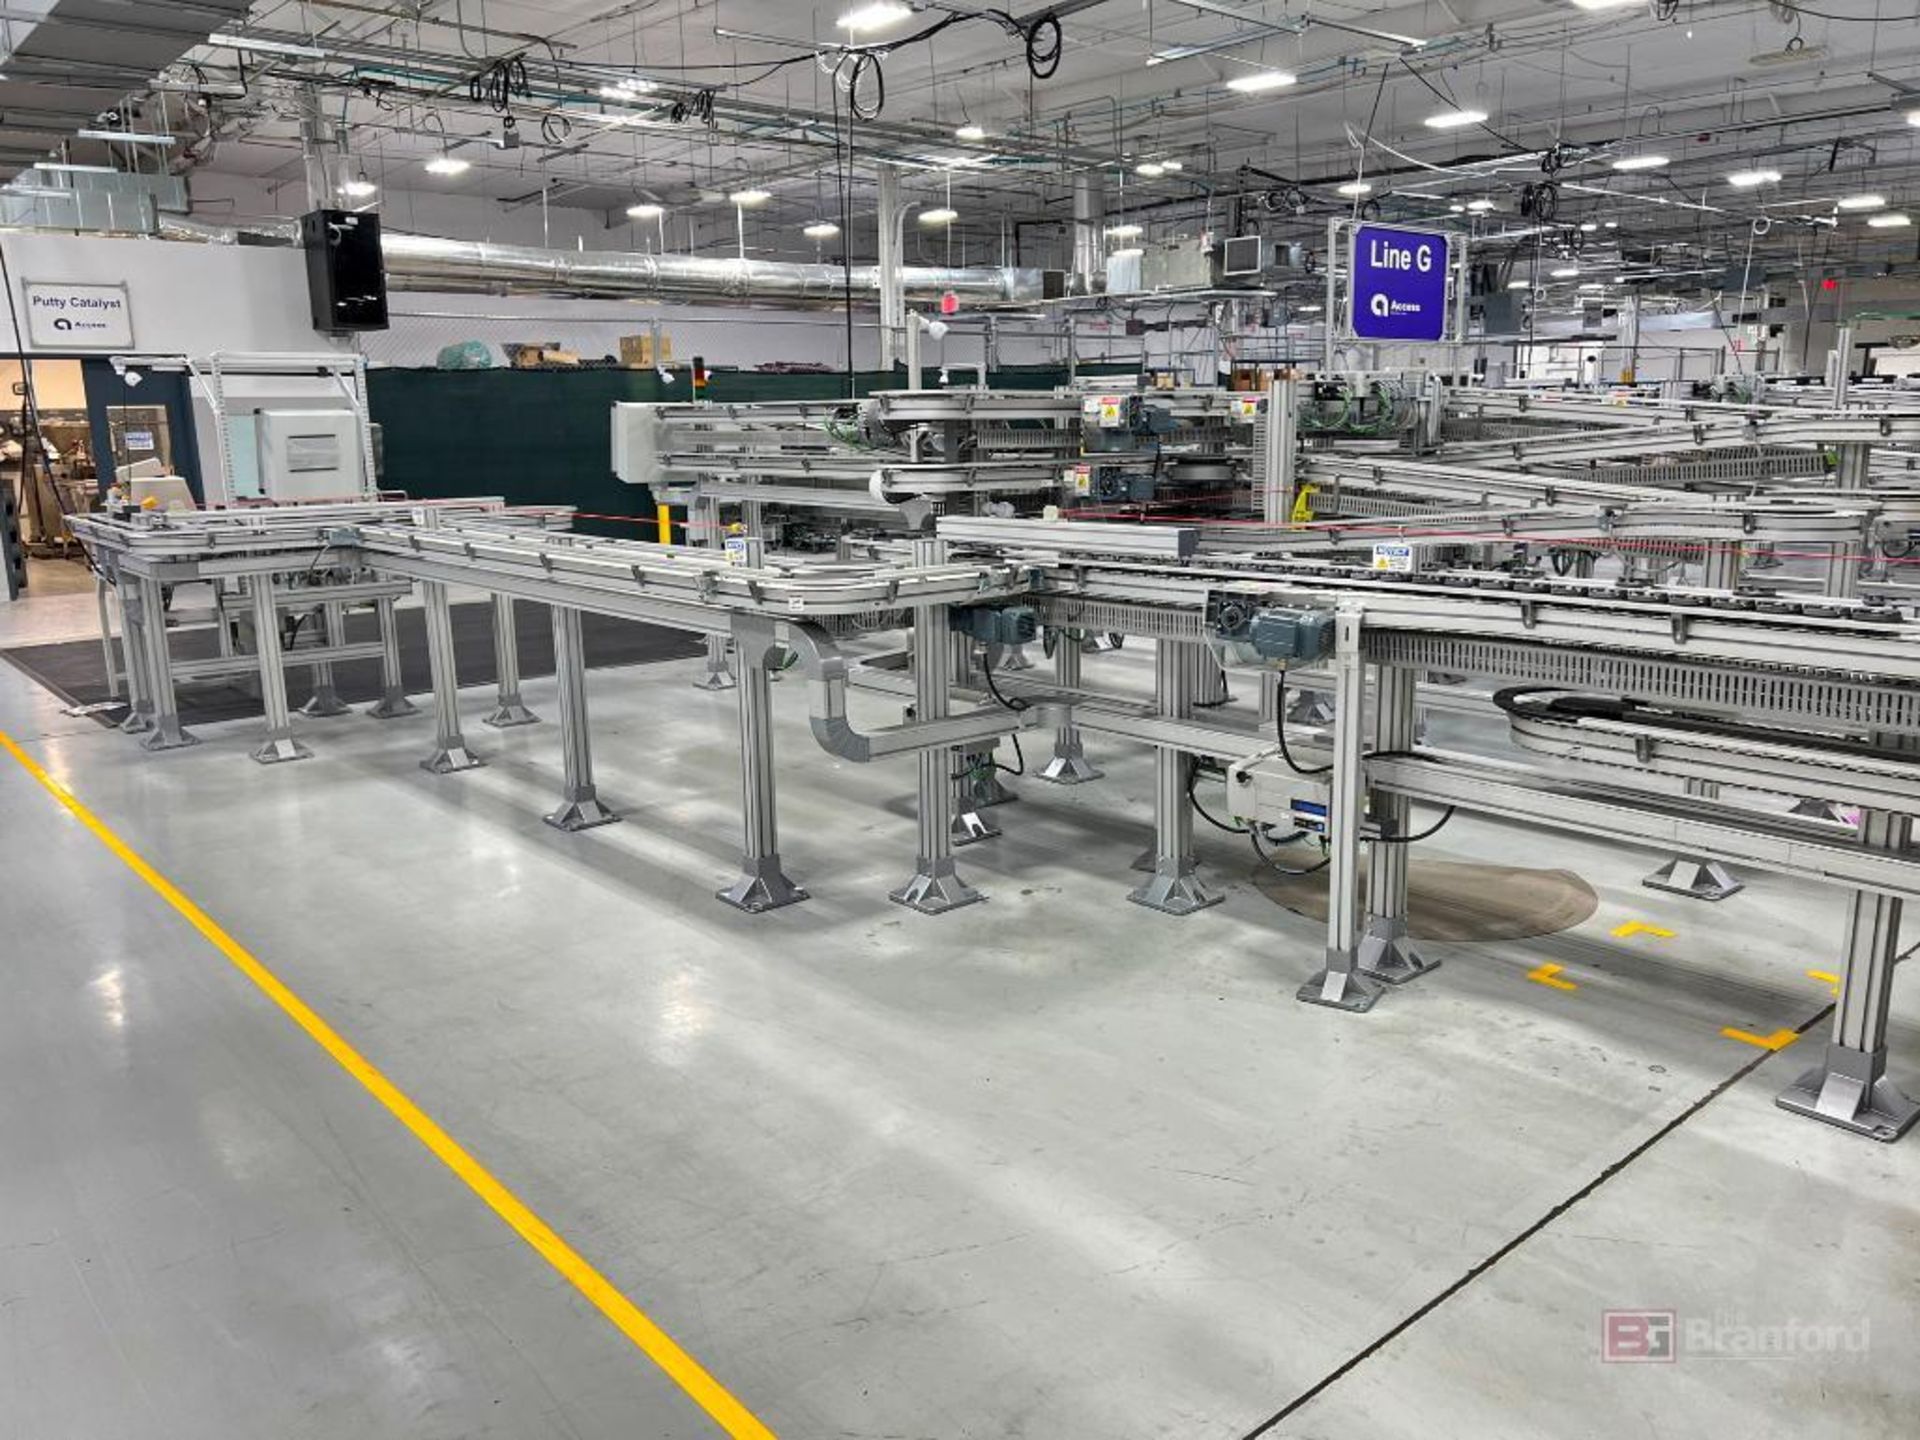 Flexlink Gen2 Multi-Layer Belt Conveyor System with DRO main control - Image 15 of 16